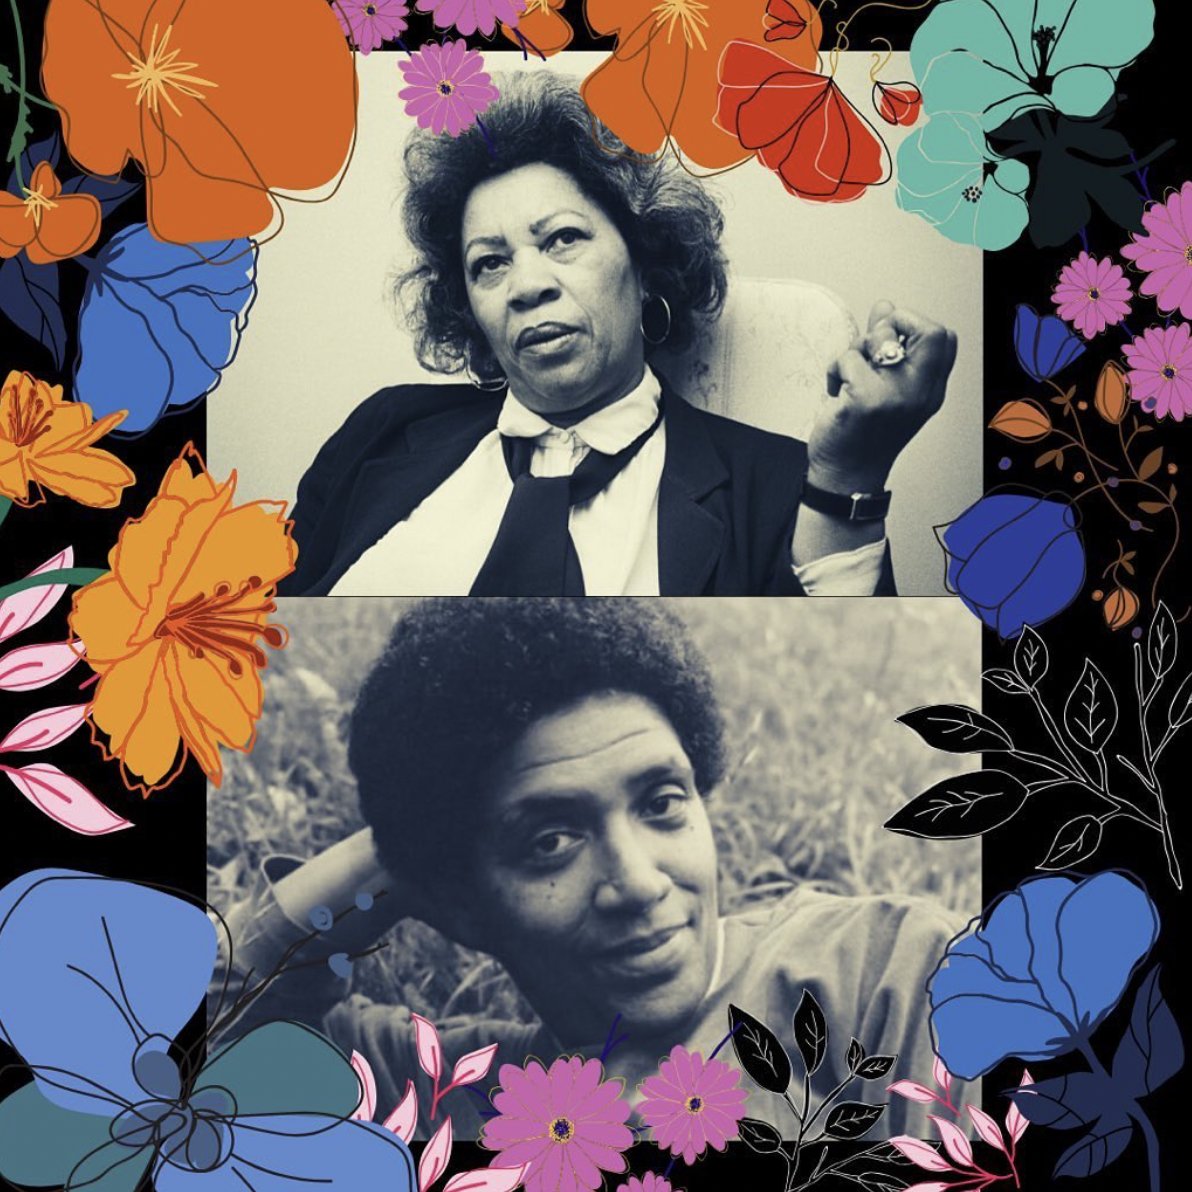 Happy birthday to two literary giants, Toni Morrison and Audre Lorde. Their work fosters pride in our identities and urges us to organize our communities until we achieve liberation for all. In their memory, we care for each other and speak truth to power. 🎨: @fac_research